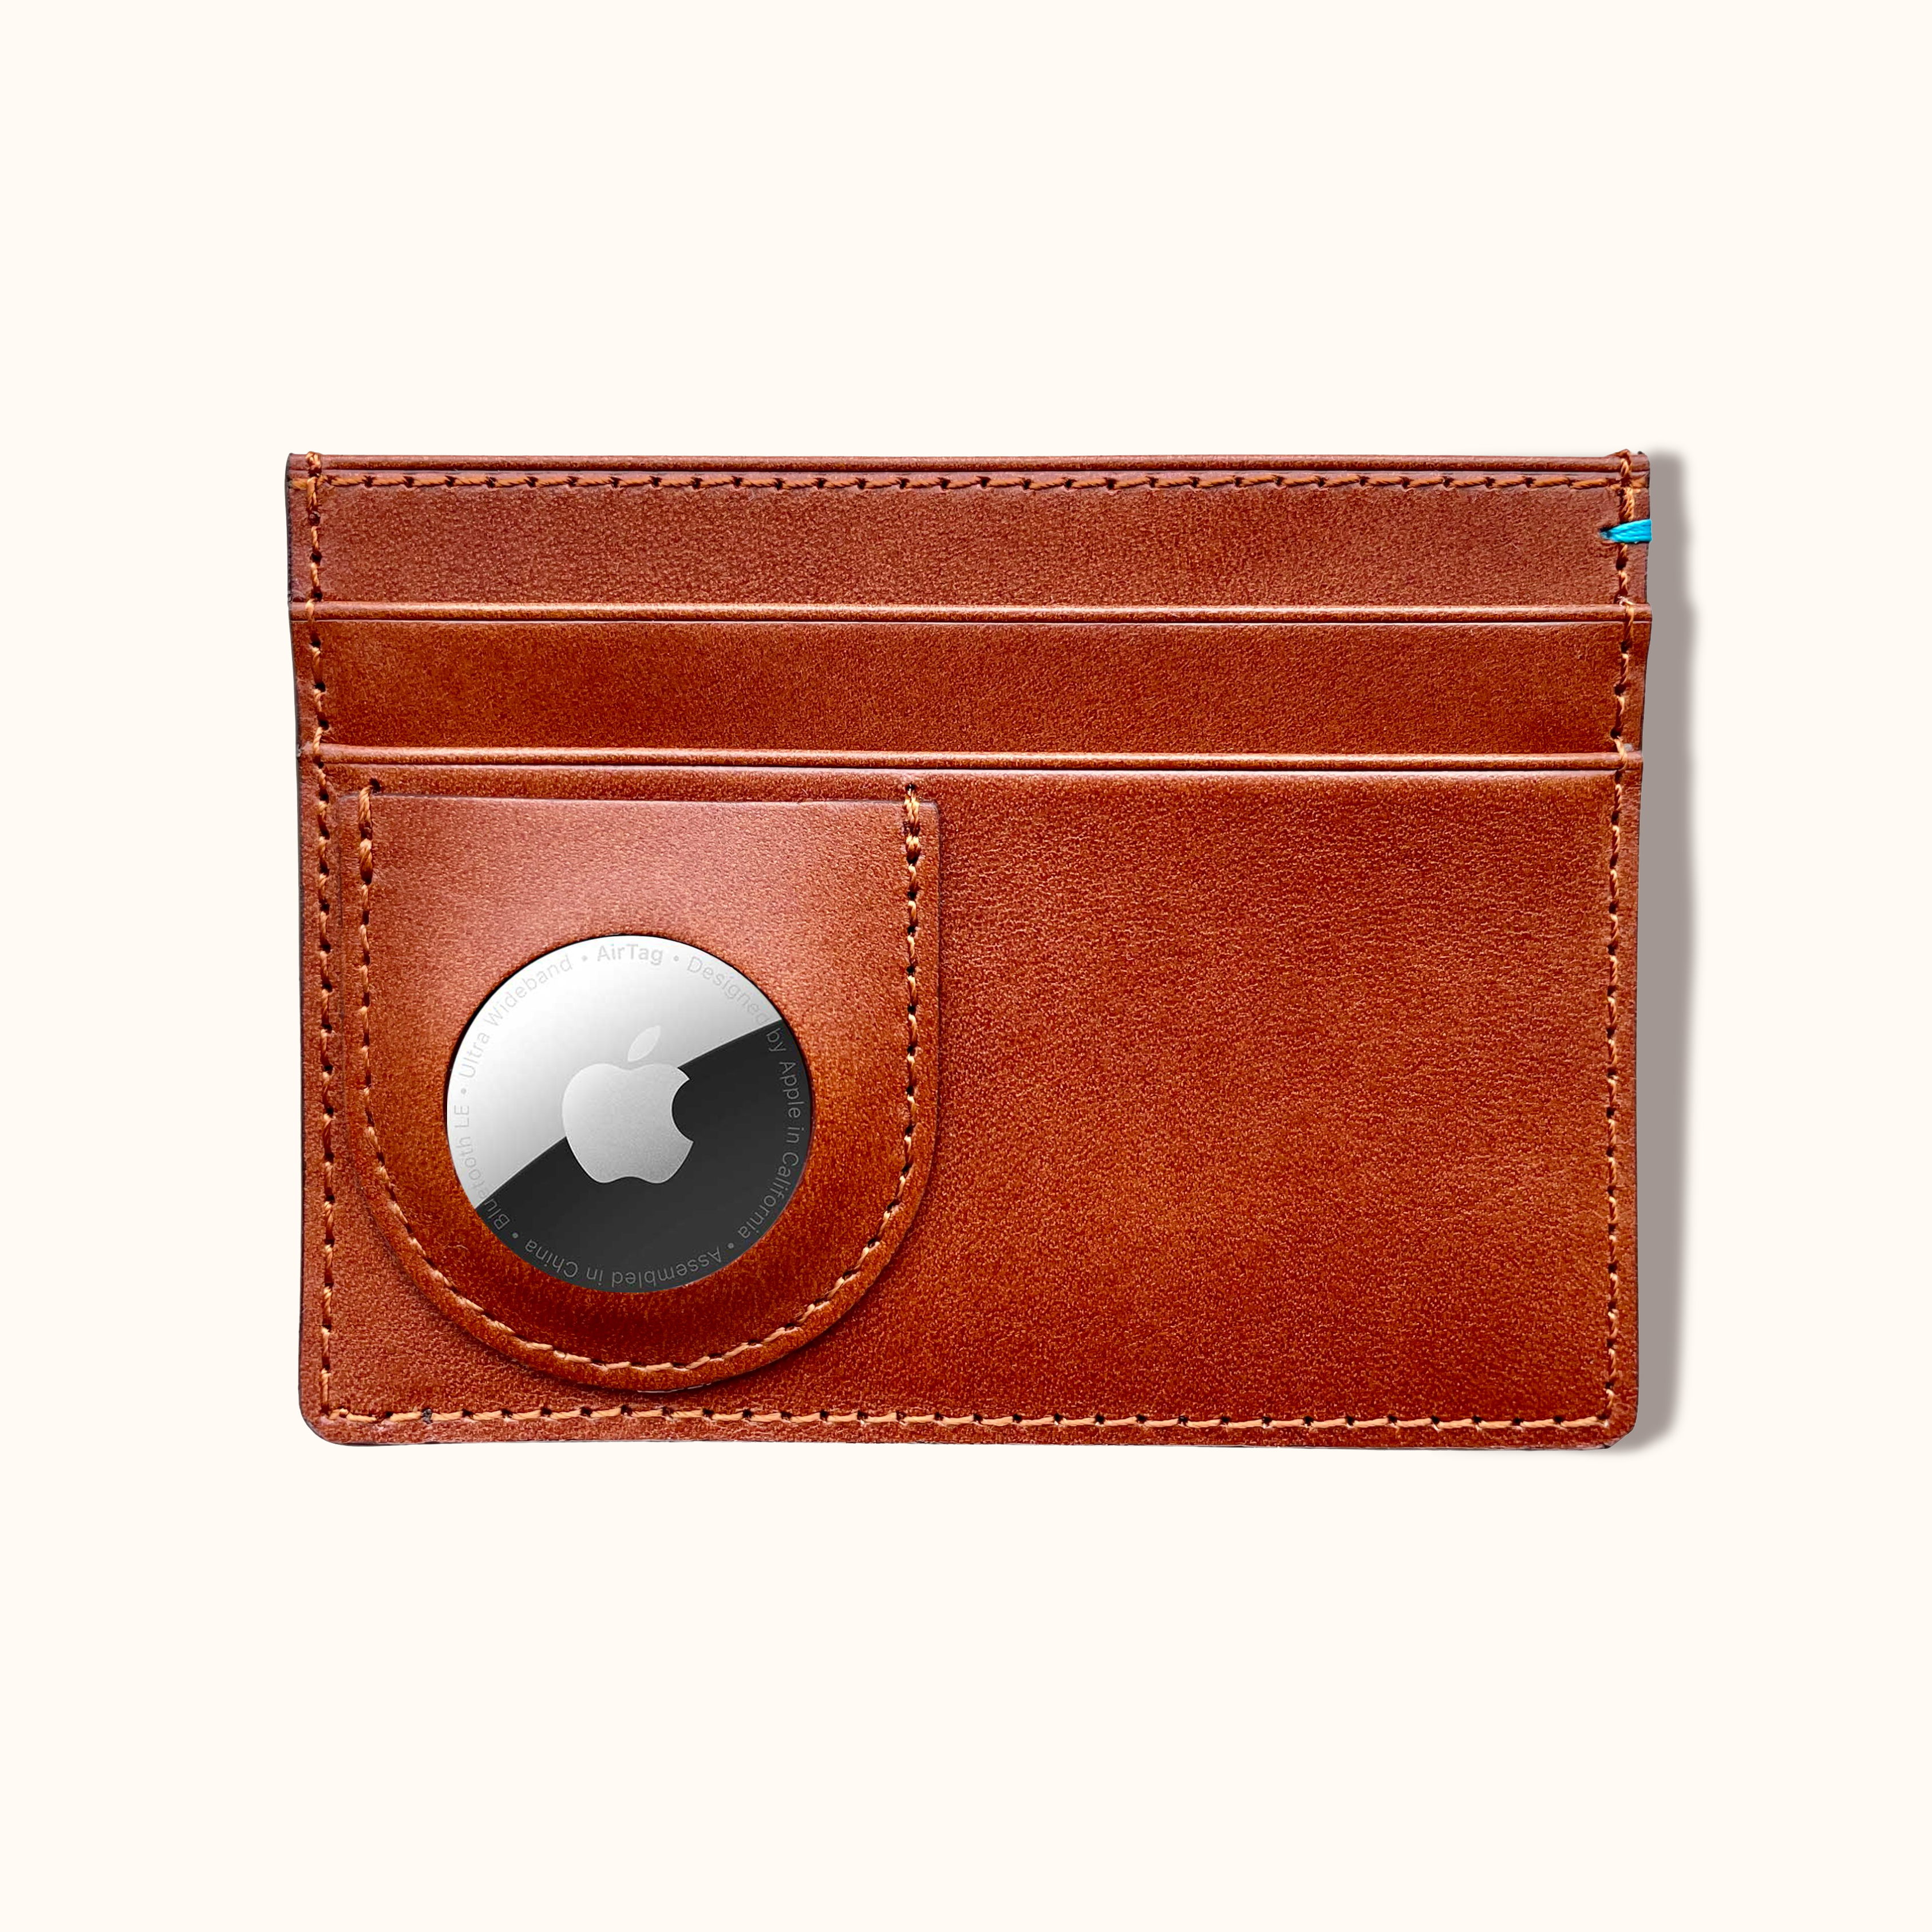 The Italian Leather AirTag Wallet - Tuscan Tan